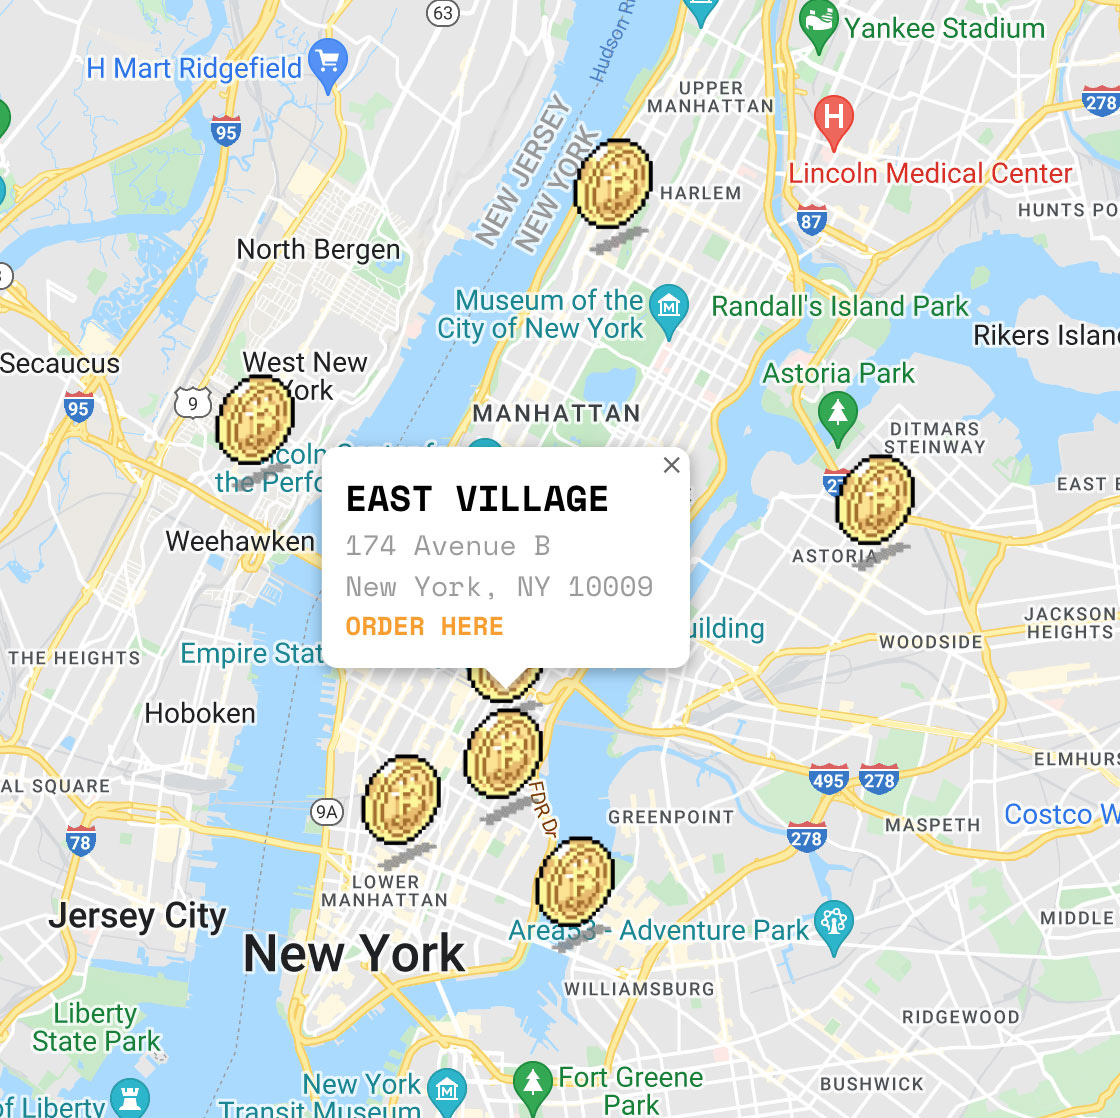 Google Map view of NYC, featuring overlays of Bitcoin Pizza locations